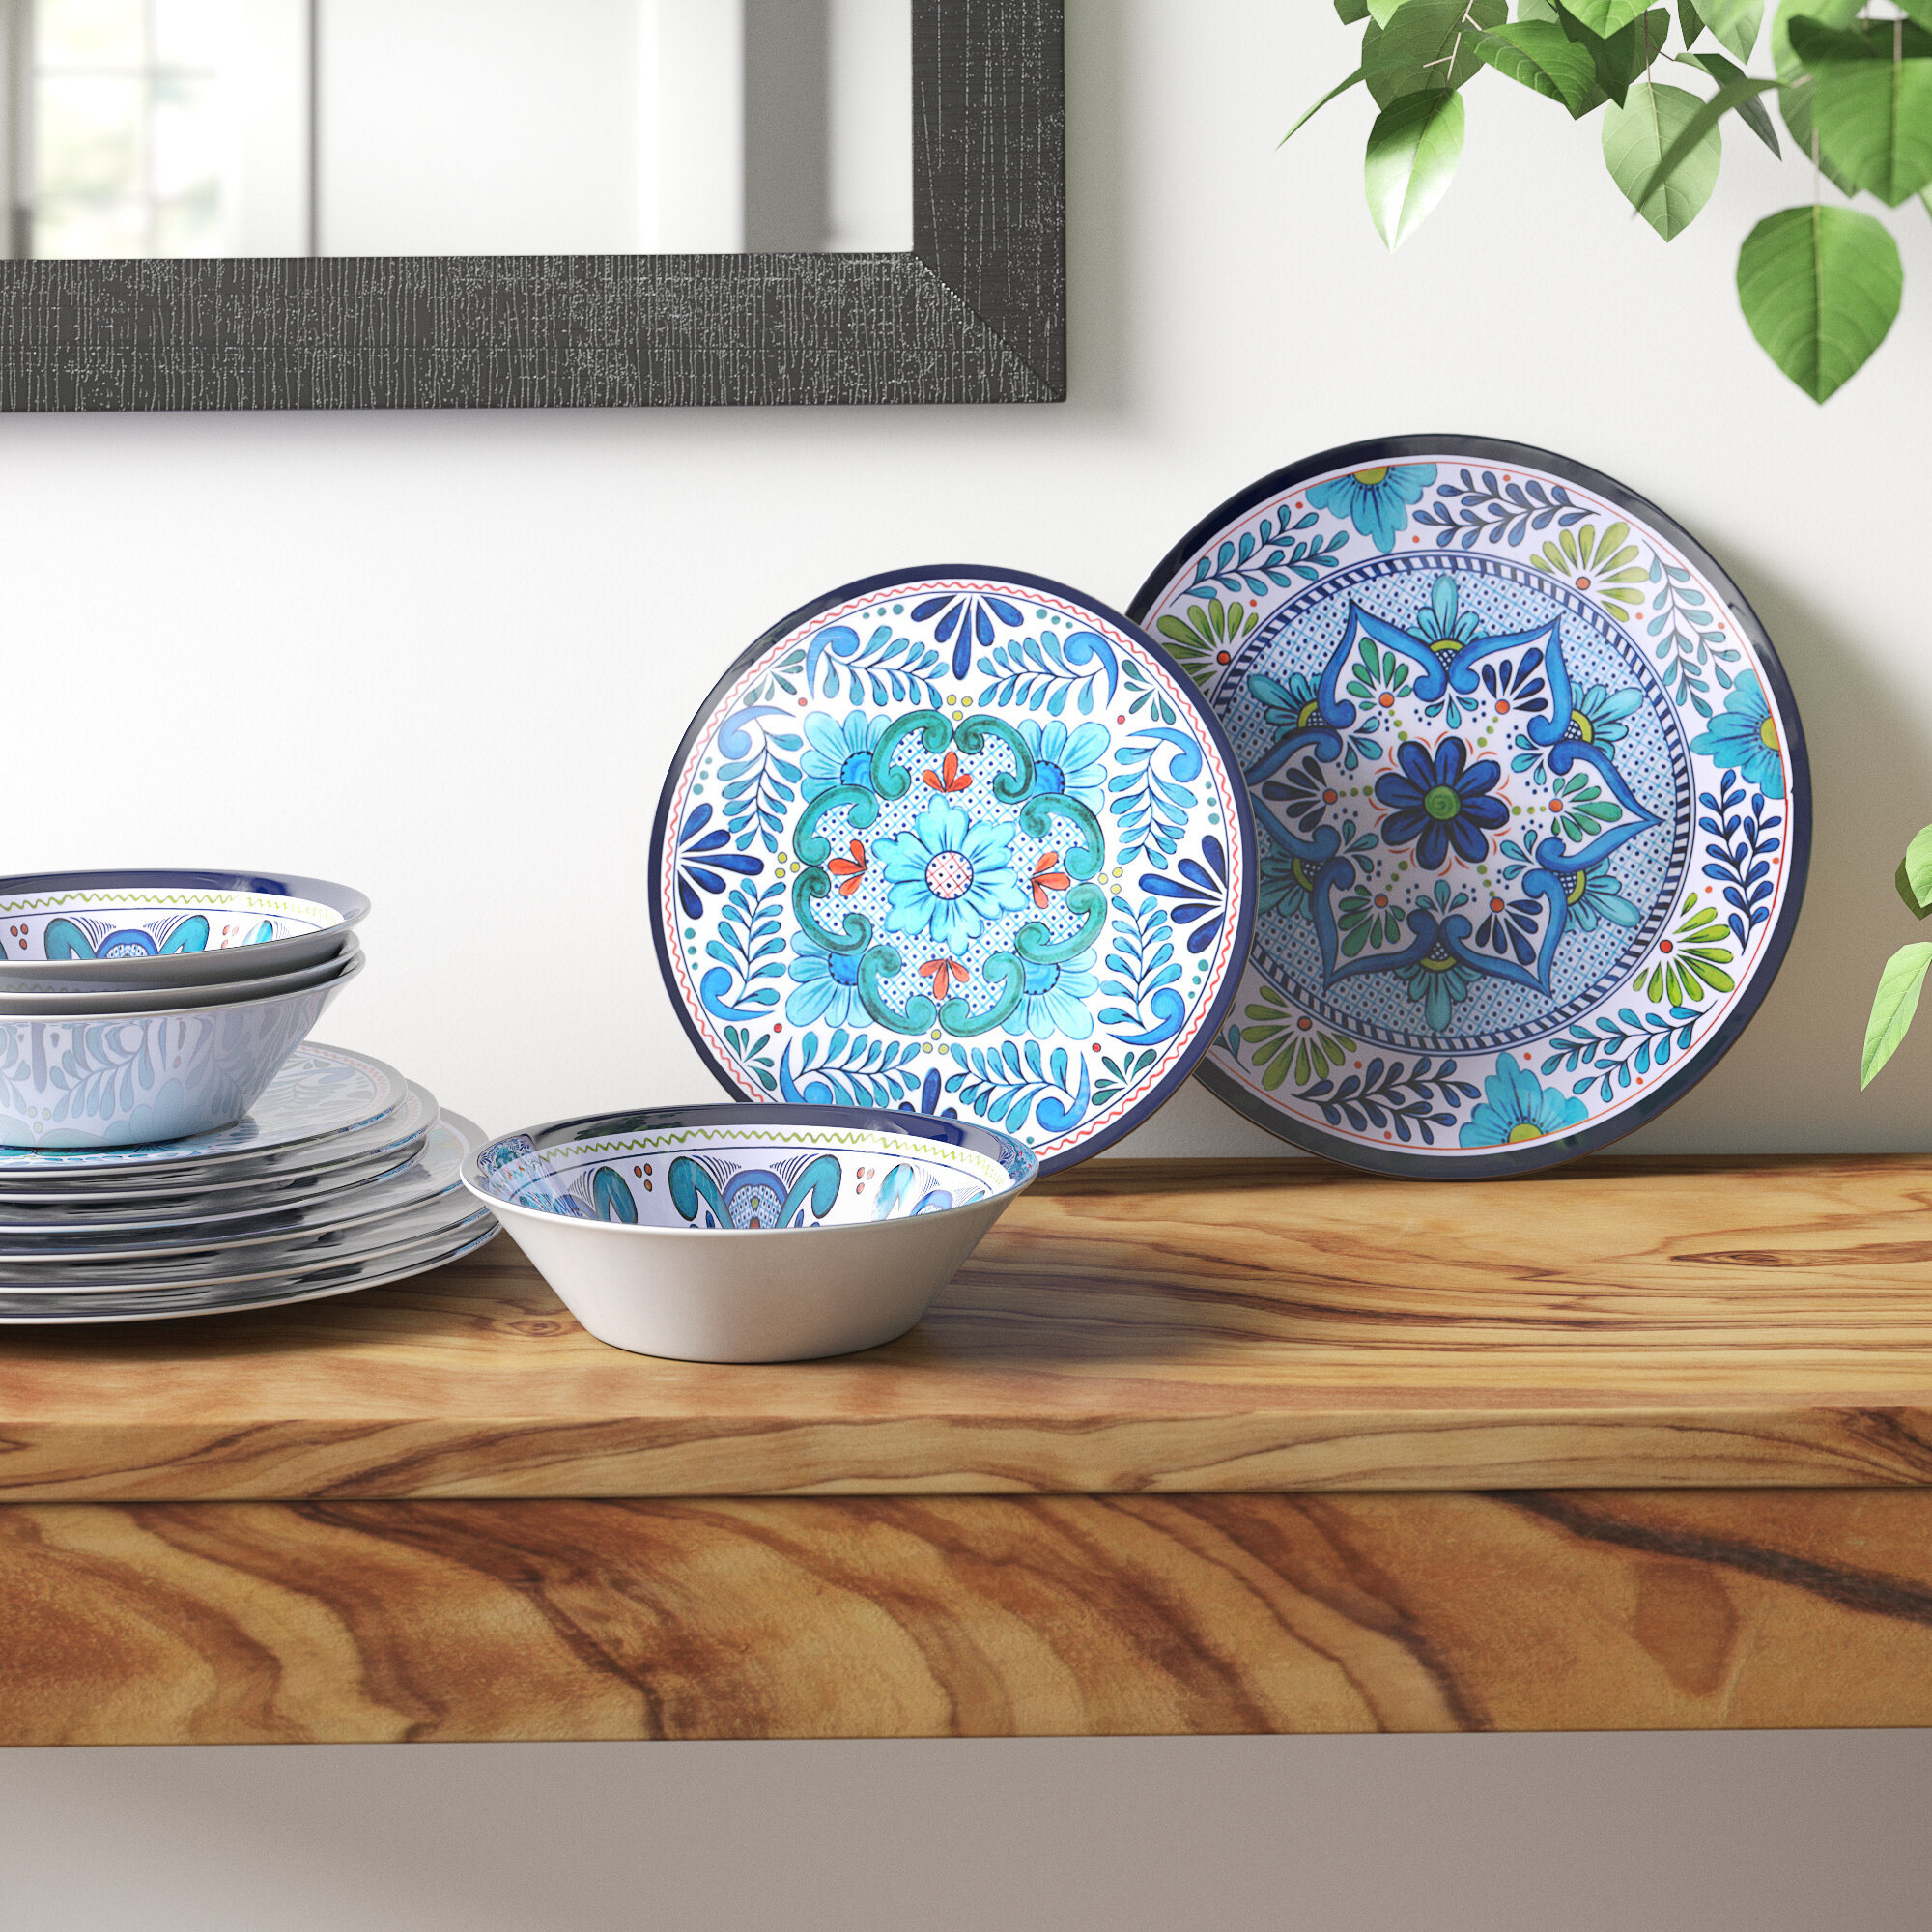 [BIG SALE] For You: Chip-Resistant Dinnerware You’ll Love In 2021 | Wayfair